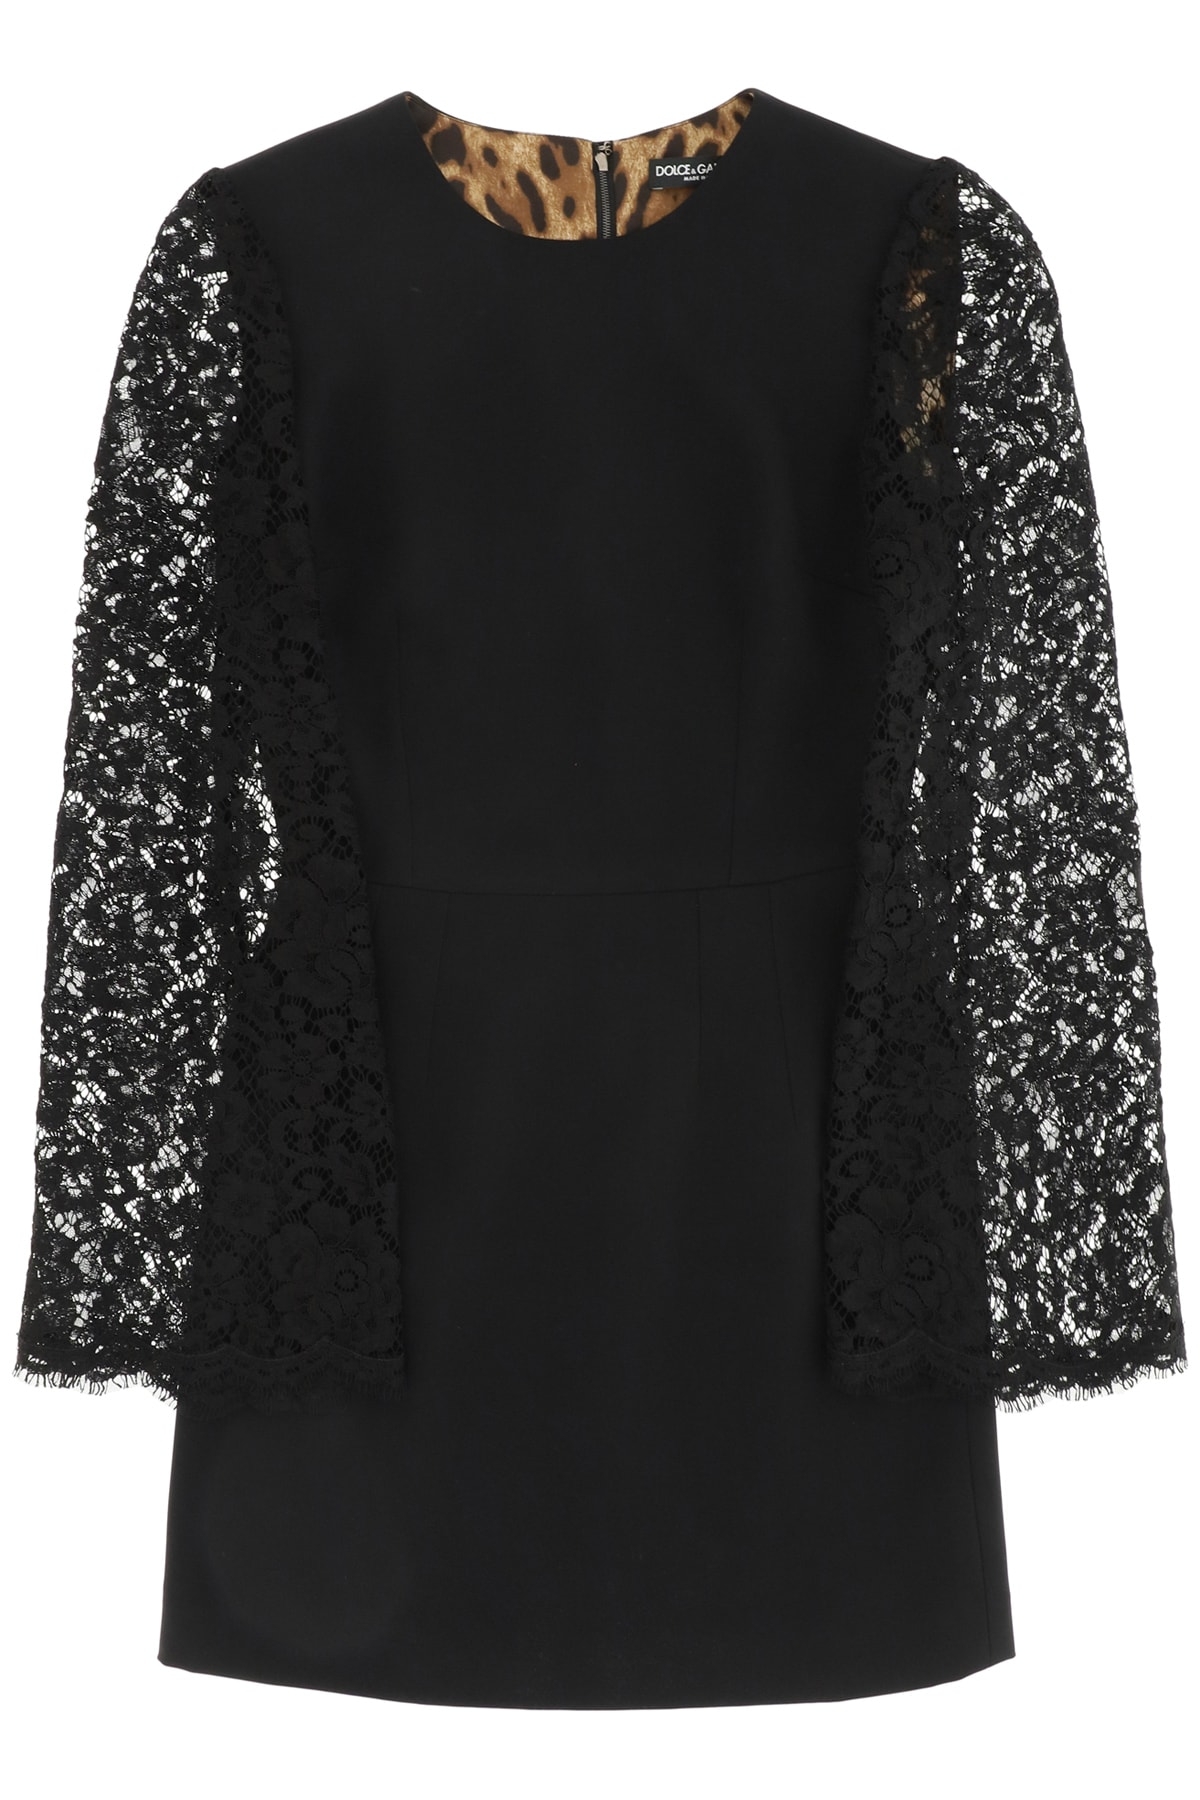 Dolce & Gabbana Mini Dress With Cordonetto Lace Sleeves